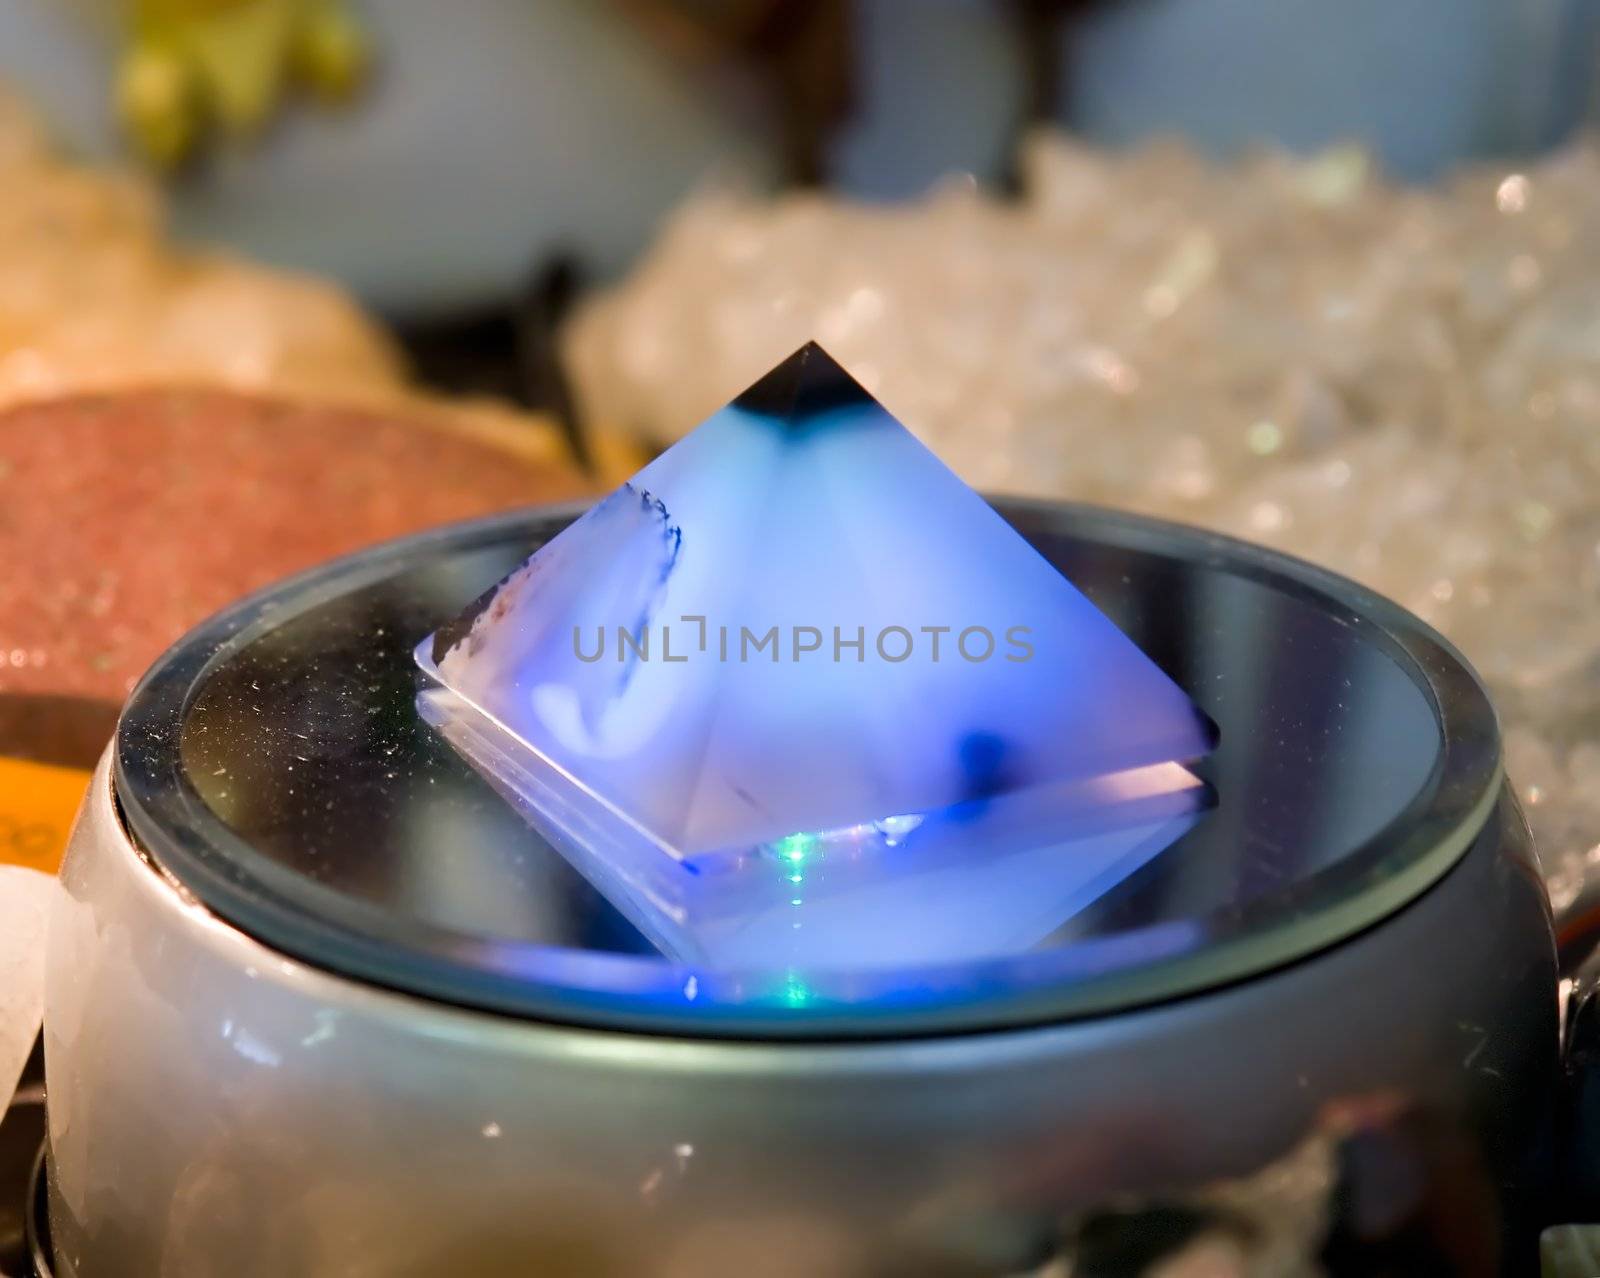 Small magic pyramid on a mirror support